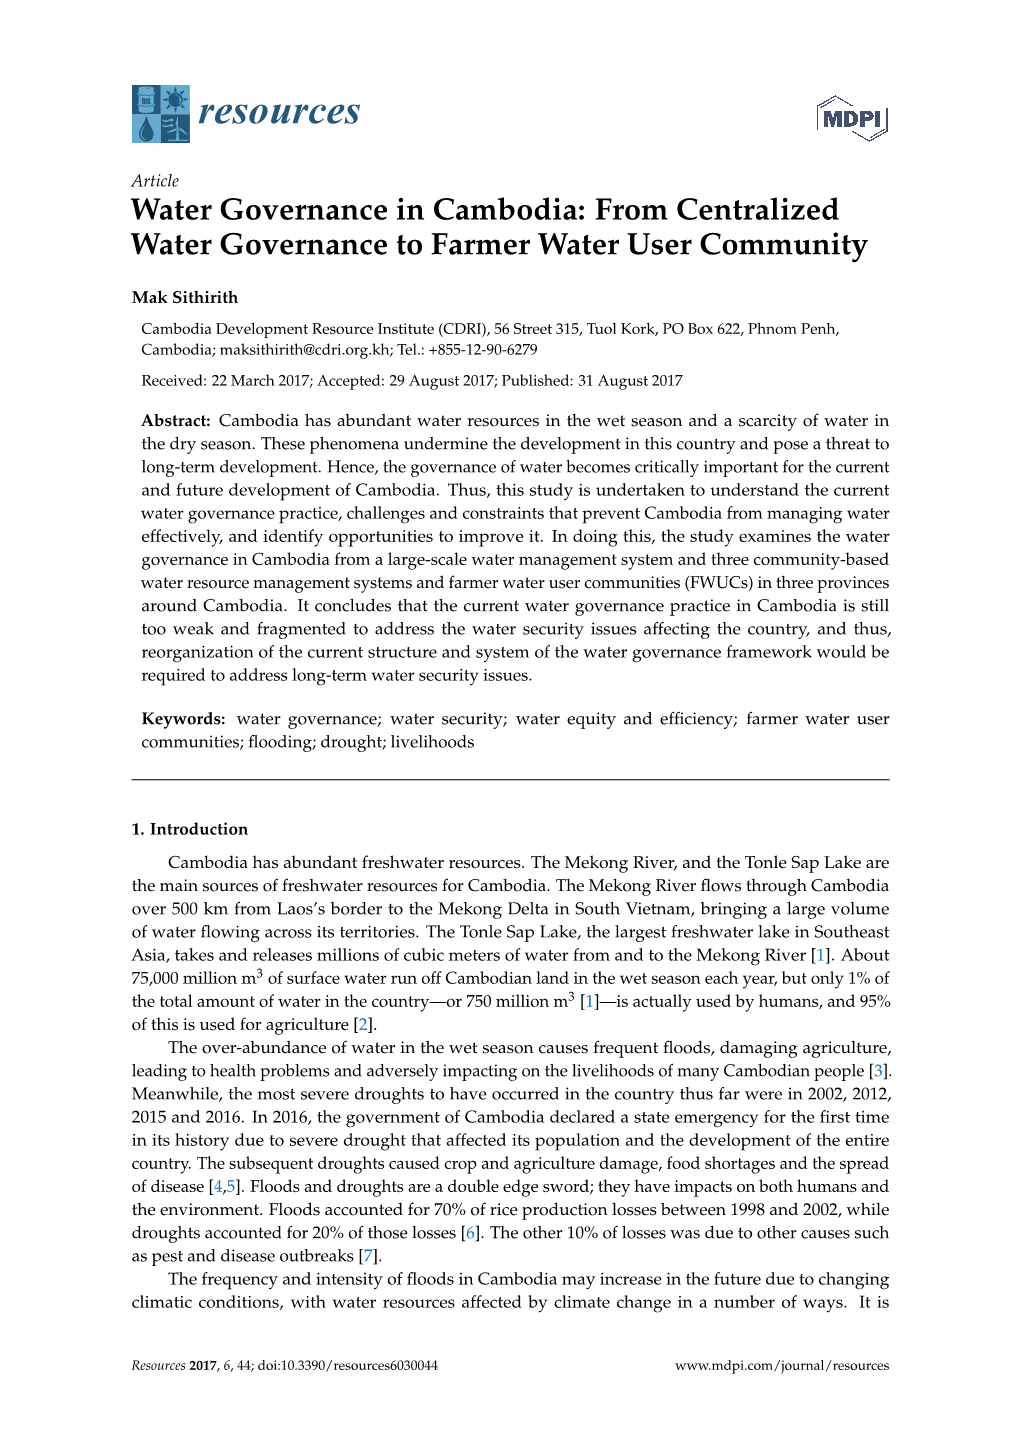 Water Governance in Cambodia: from Centralized Water Governance to Farmer Water User Community